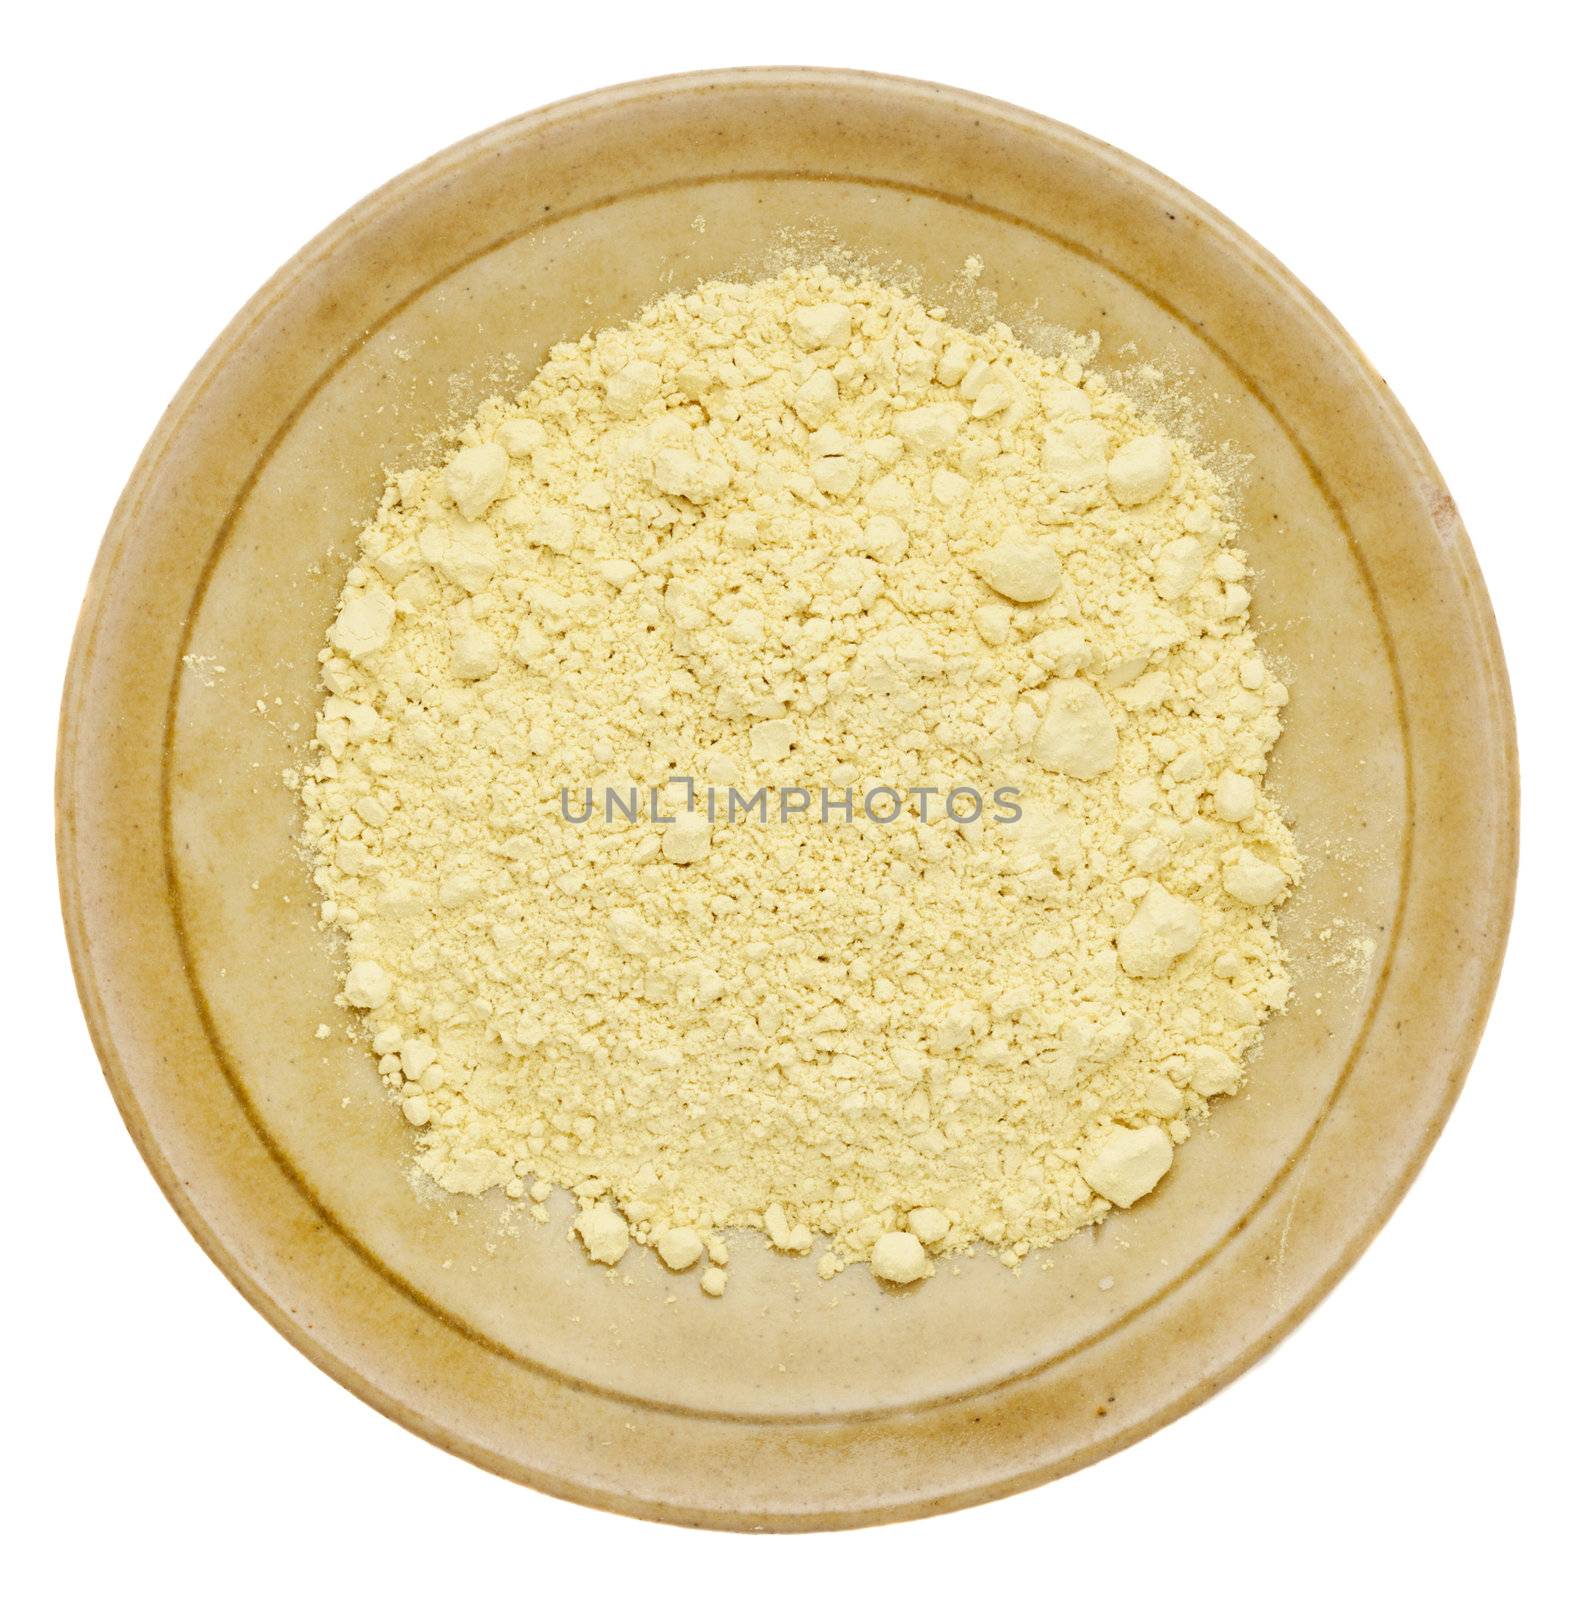 pine pollen powder (nutrition supplement) on a isolated small ceramic bowl